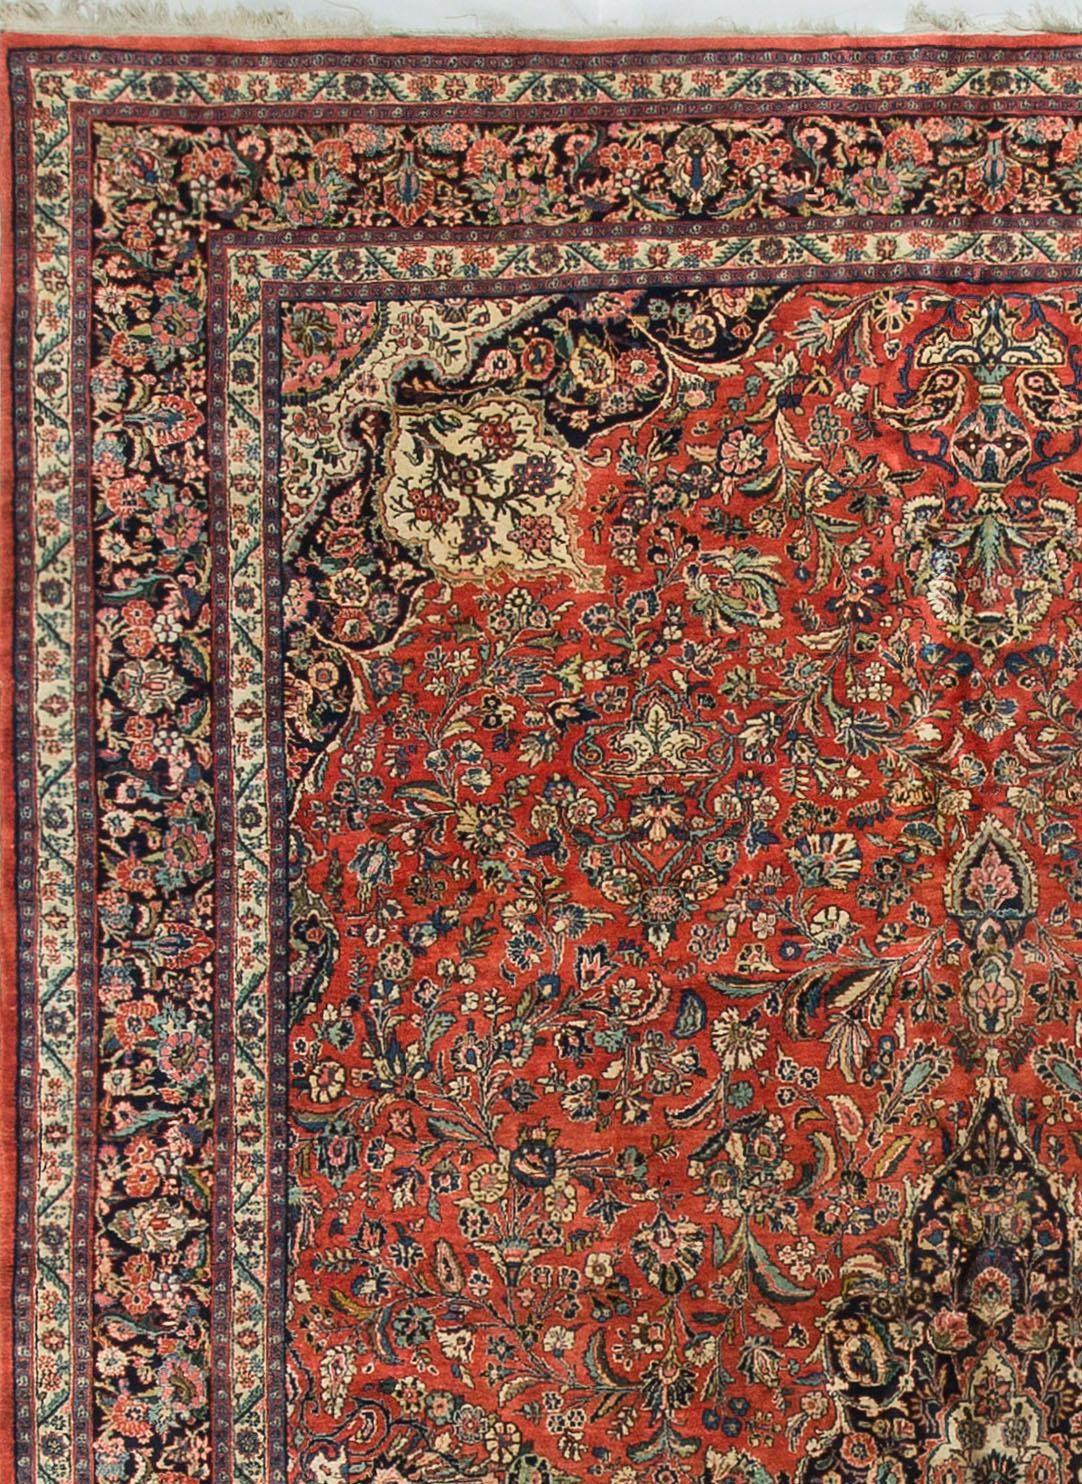 This antique Persian Kazvin rug, dating back to the 1930s, showcases a captivating and detailed design. Kazvin rugs are known for their intricate patterns, often featuring geometric motifs and stylized floral elements. The central field of this rug